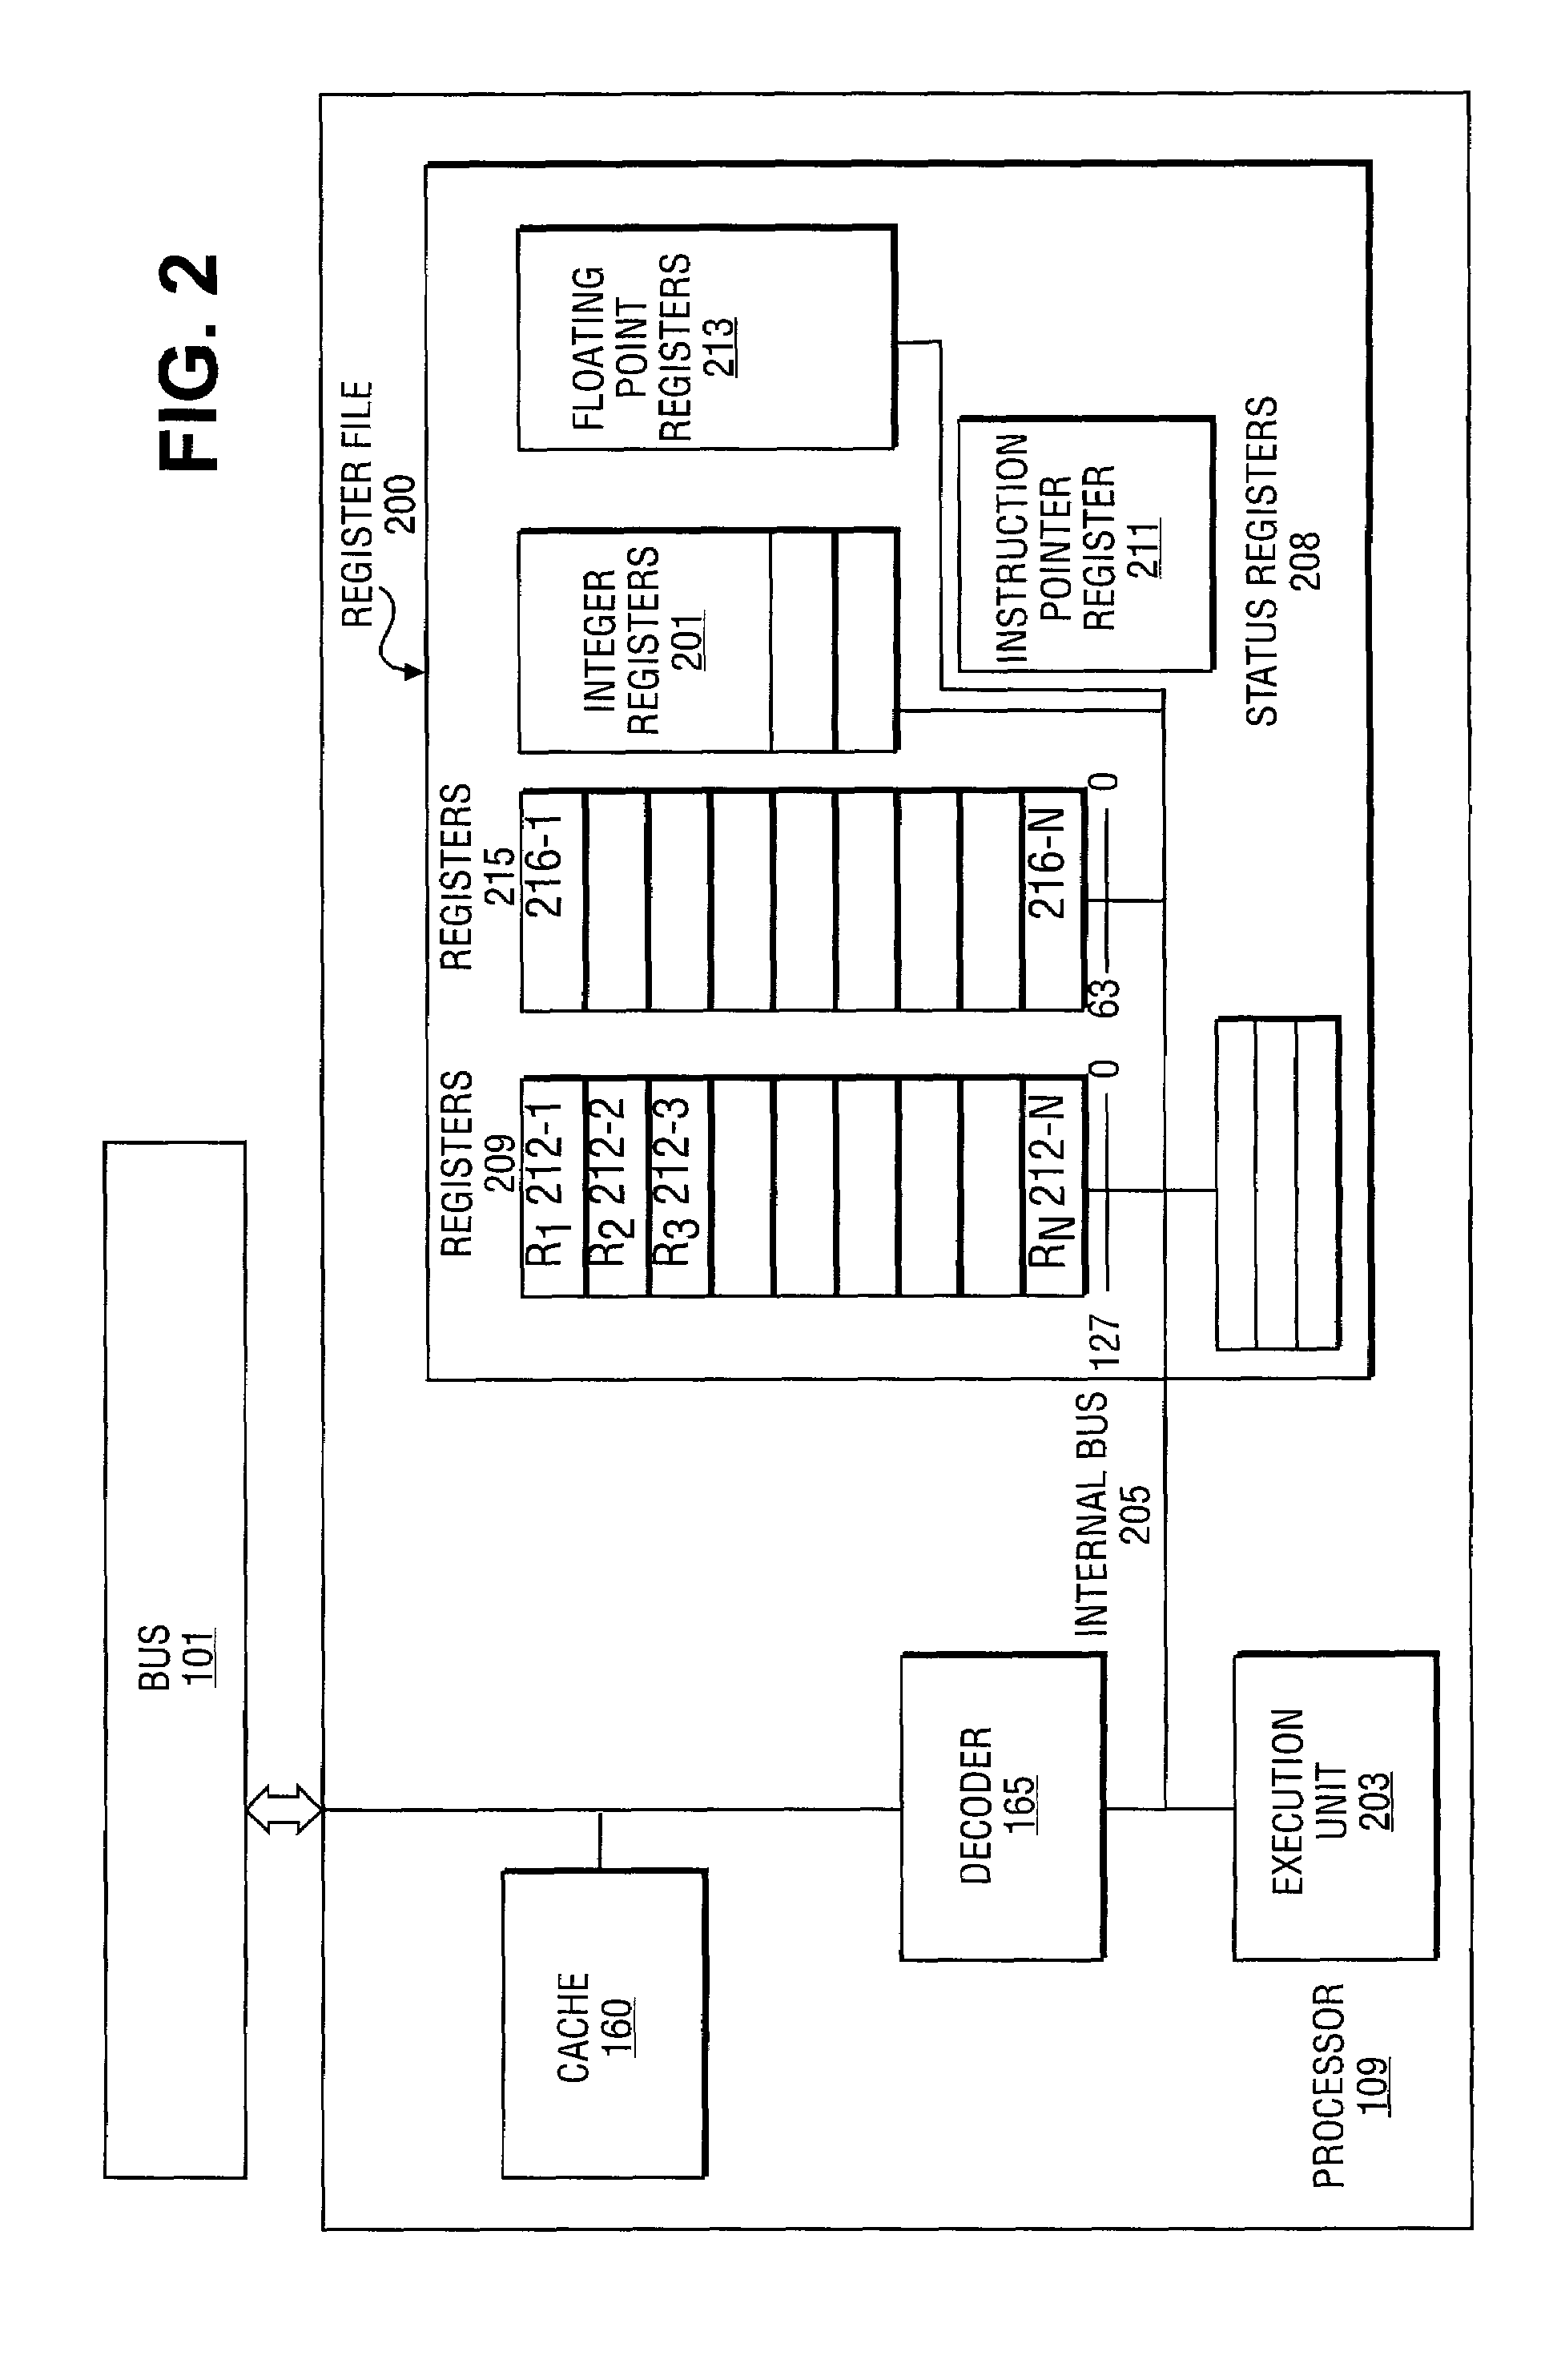 Apparatus and method for inverting a 4x4 matrix